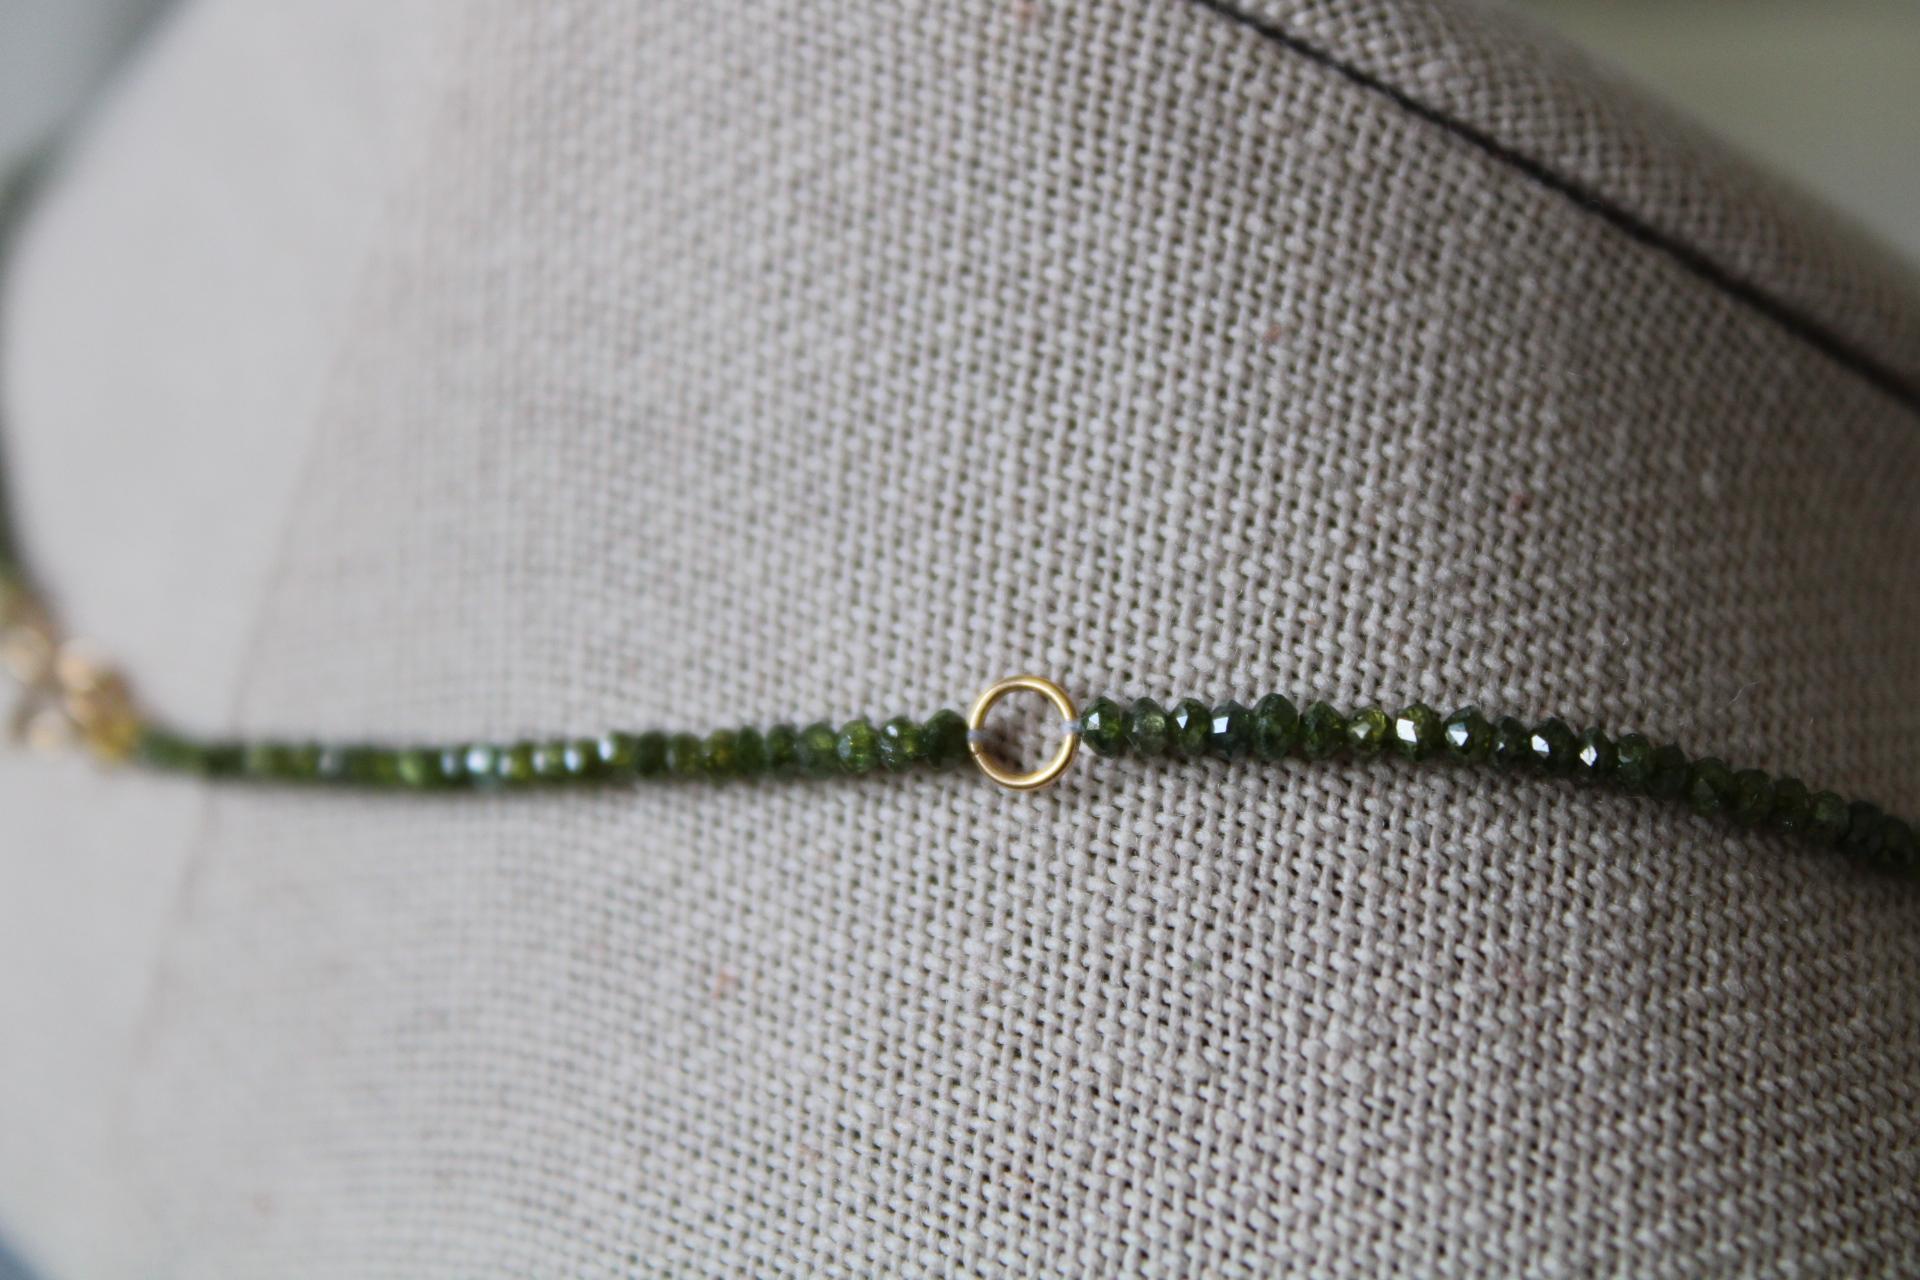 17.22 Carat Diamond Bead Chain in 18K Gold with Tsavorite Pears In New Condition For Sale In Amagansett, NY